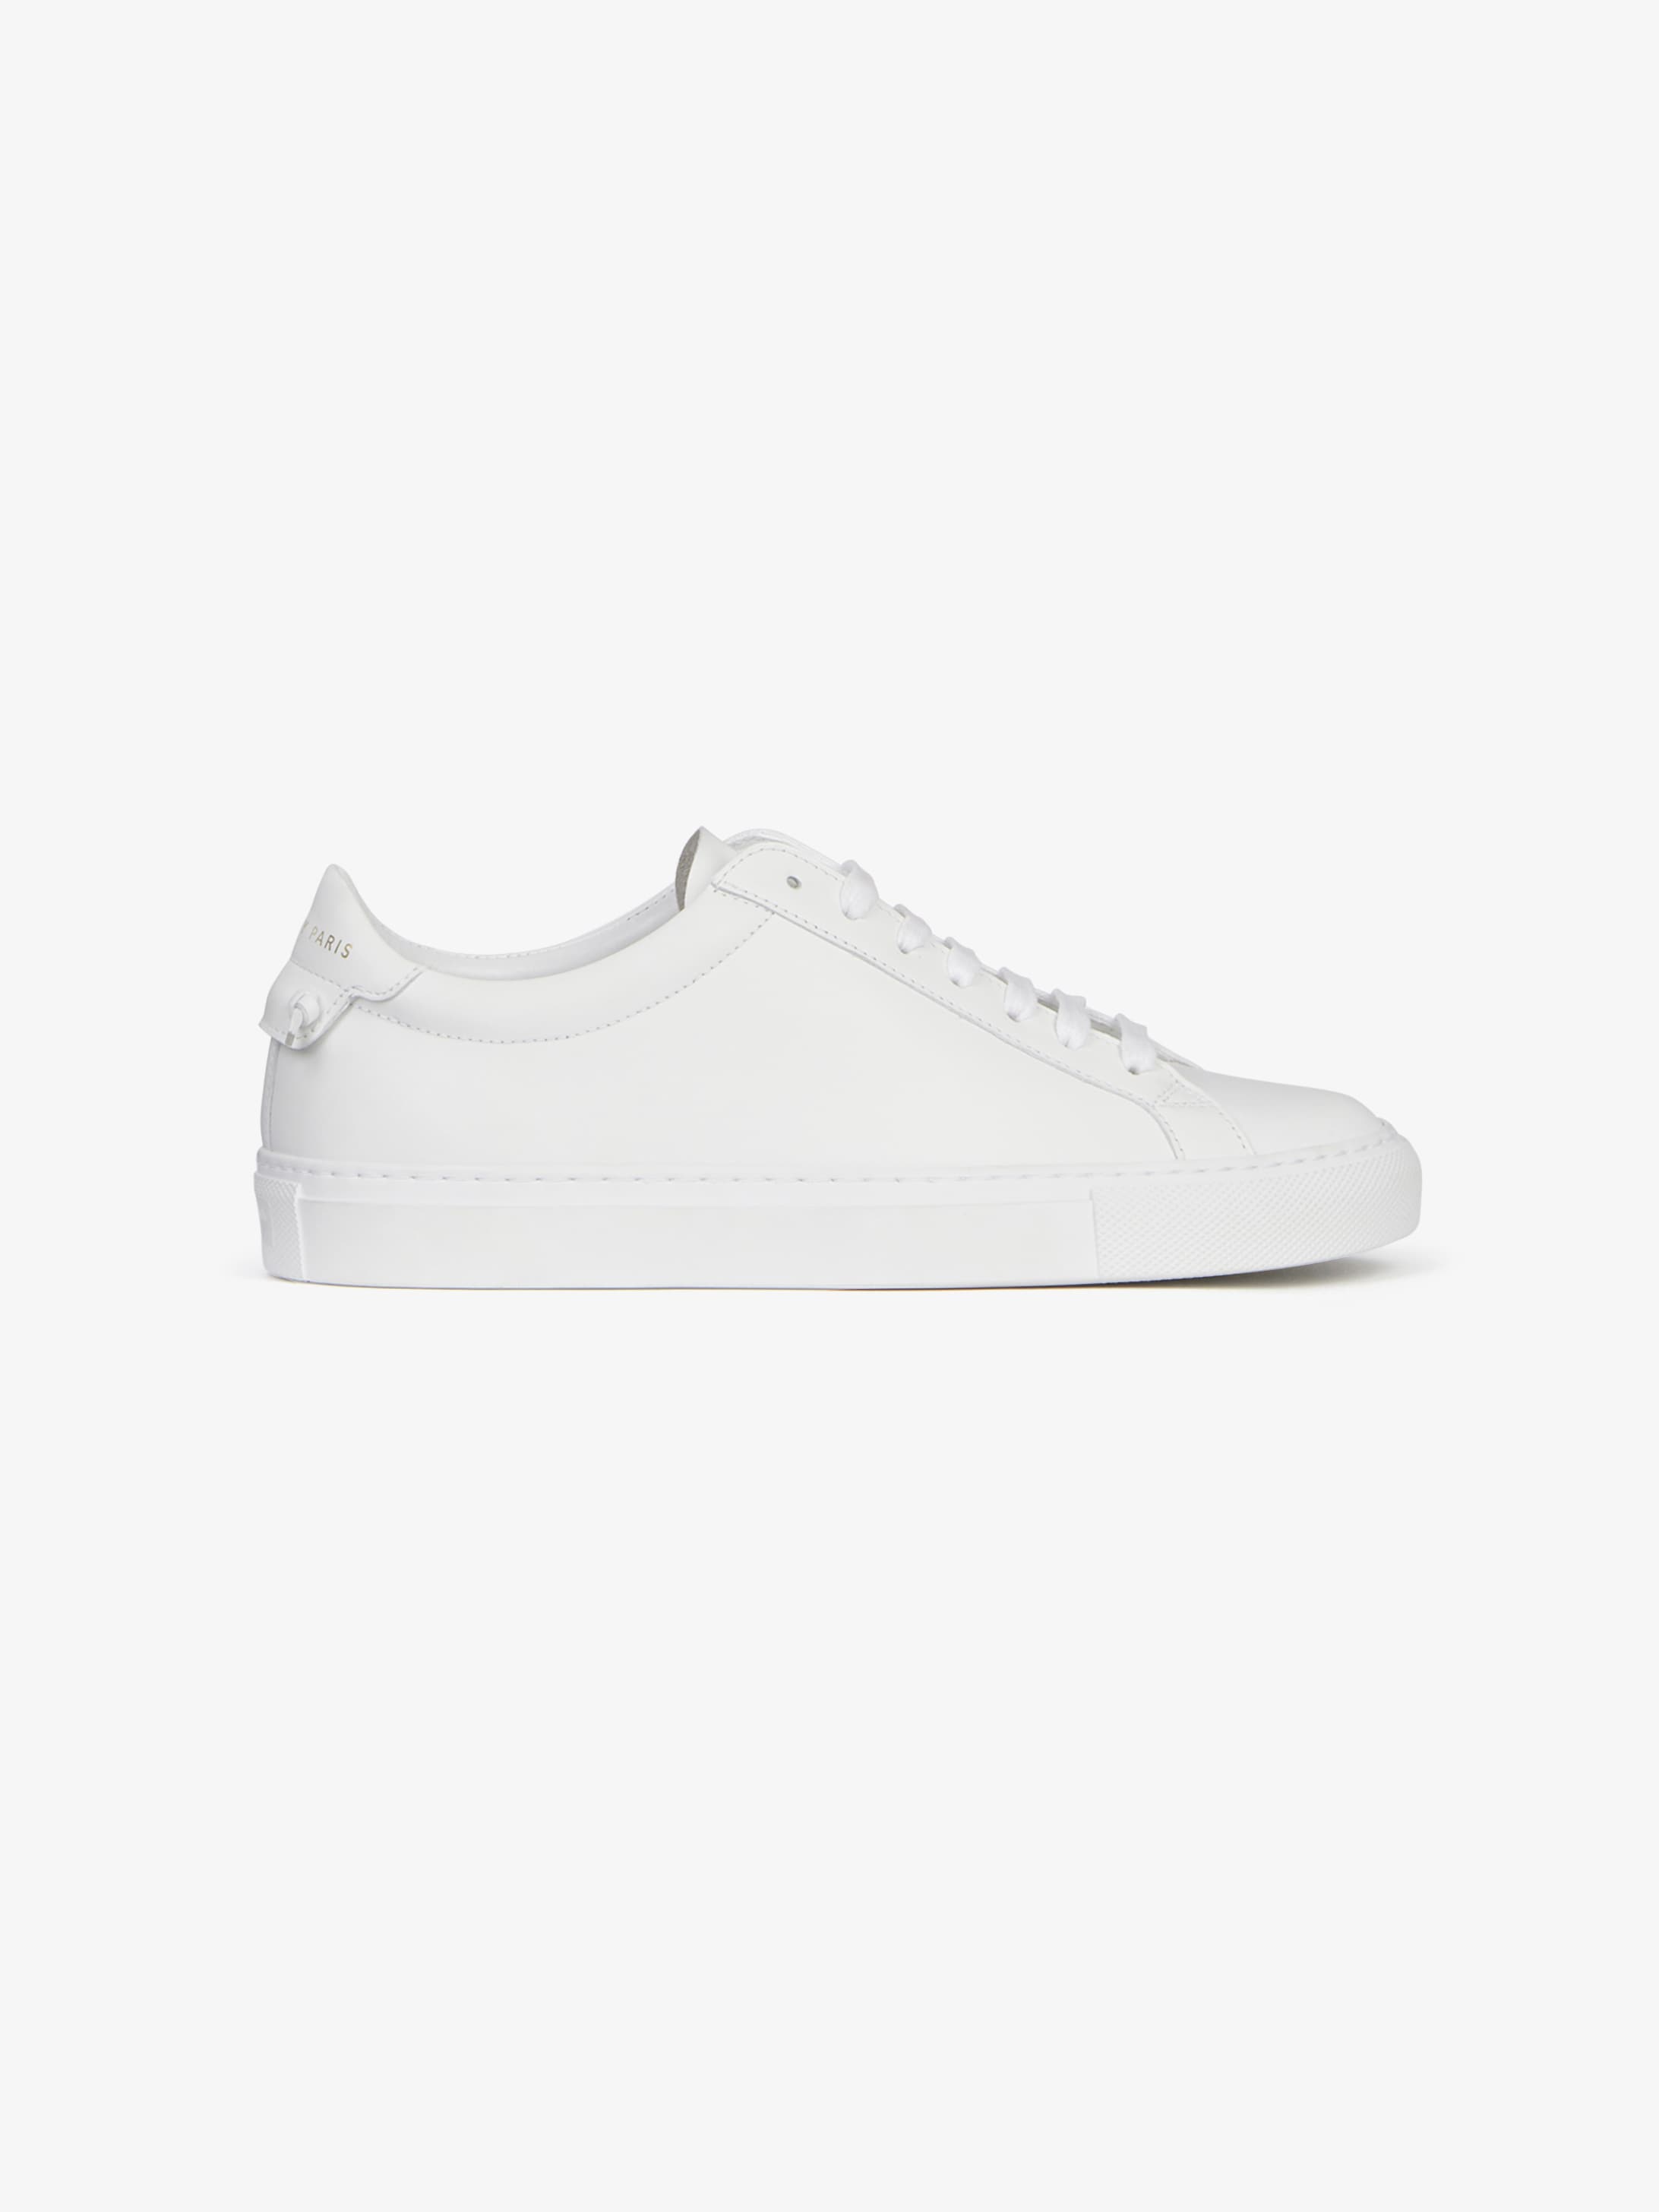 Sneakers in matte leather | GIVENCHY Paris